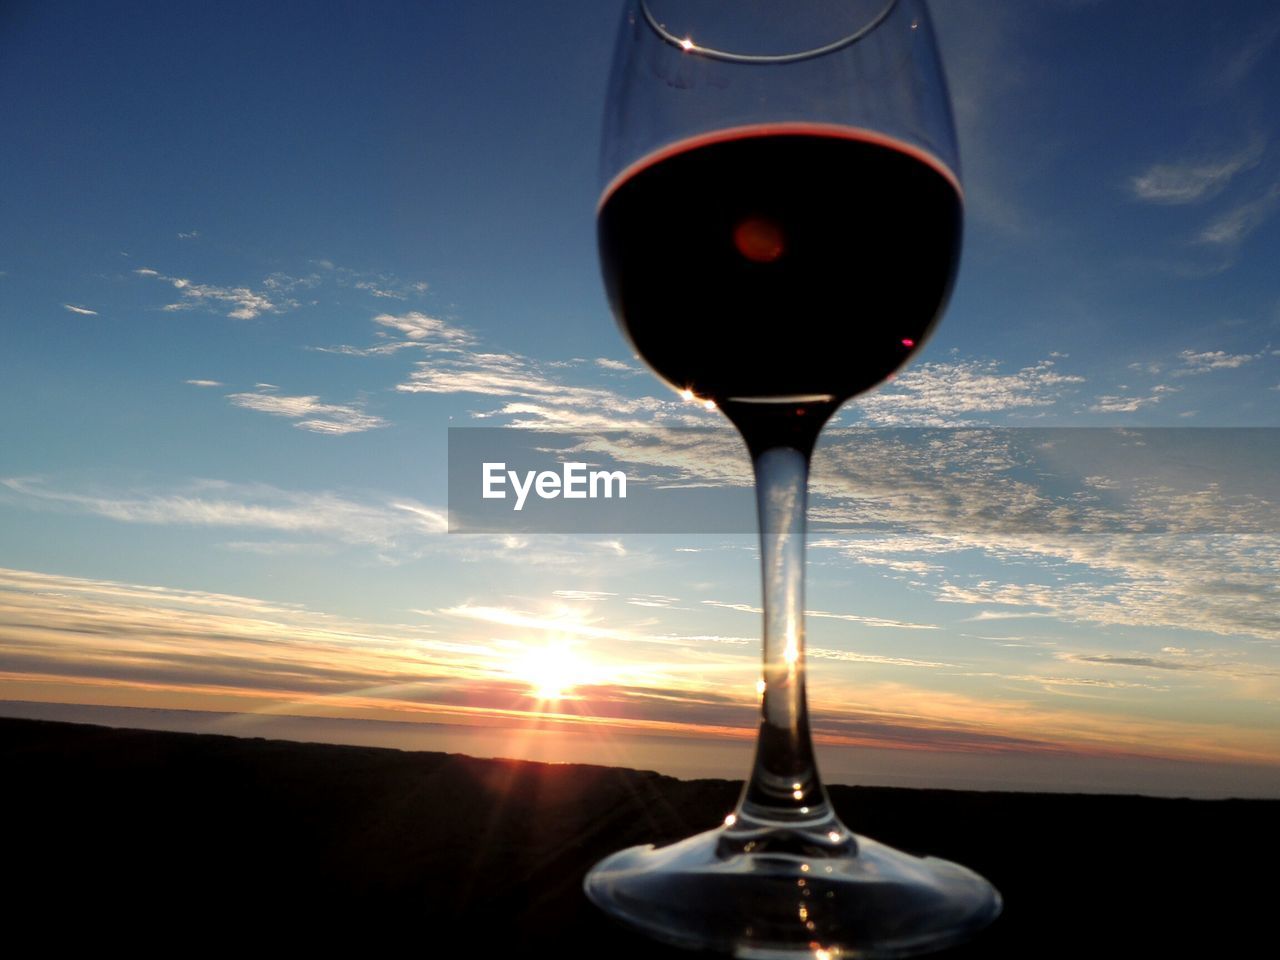 CLOSE-UP OF WINEGLASS AGAINST SKY